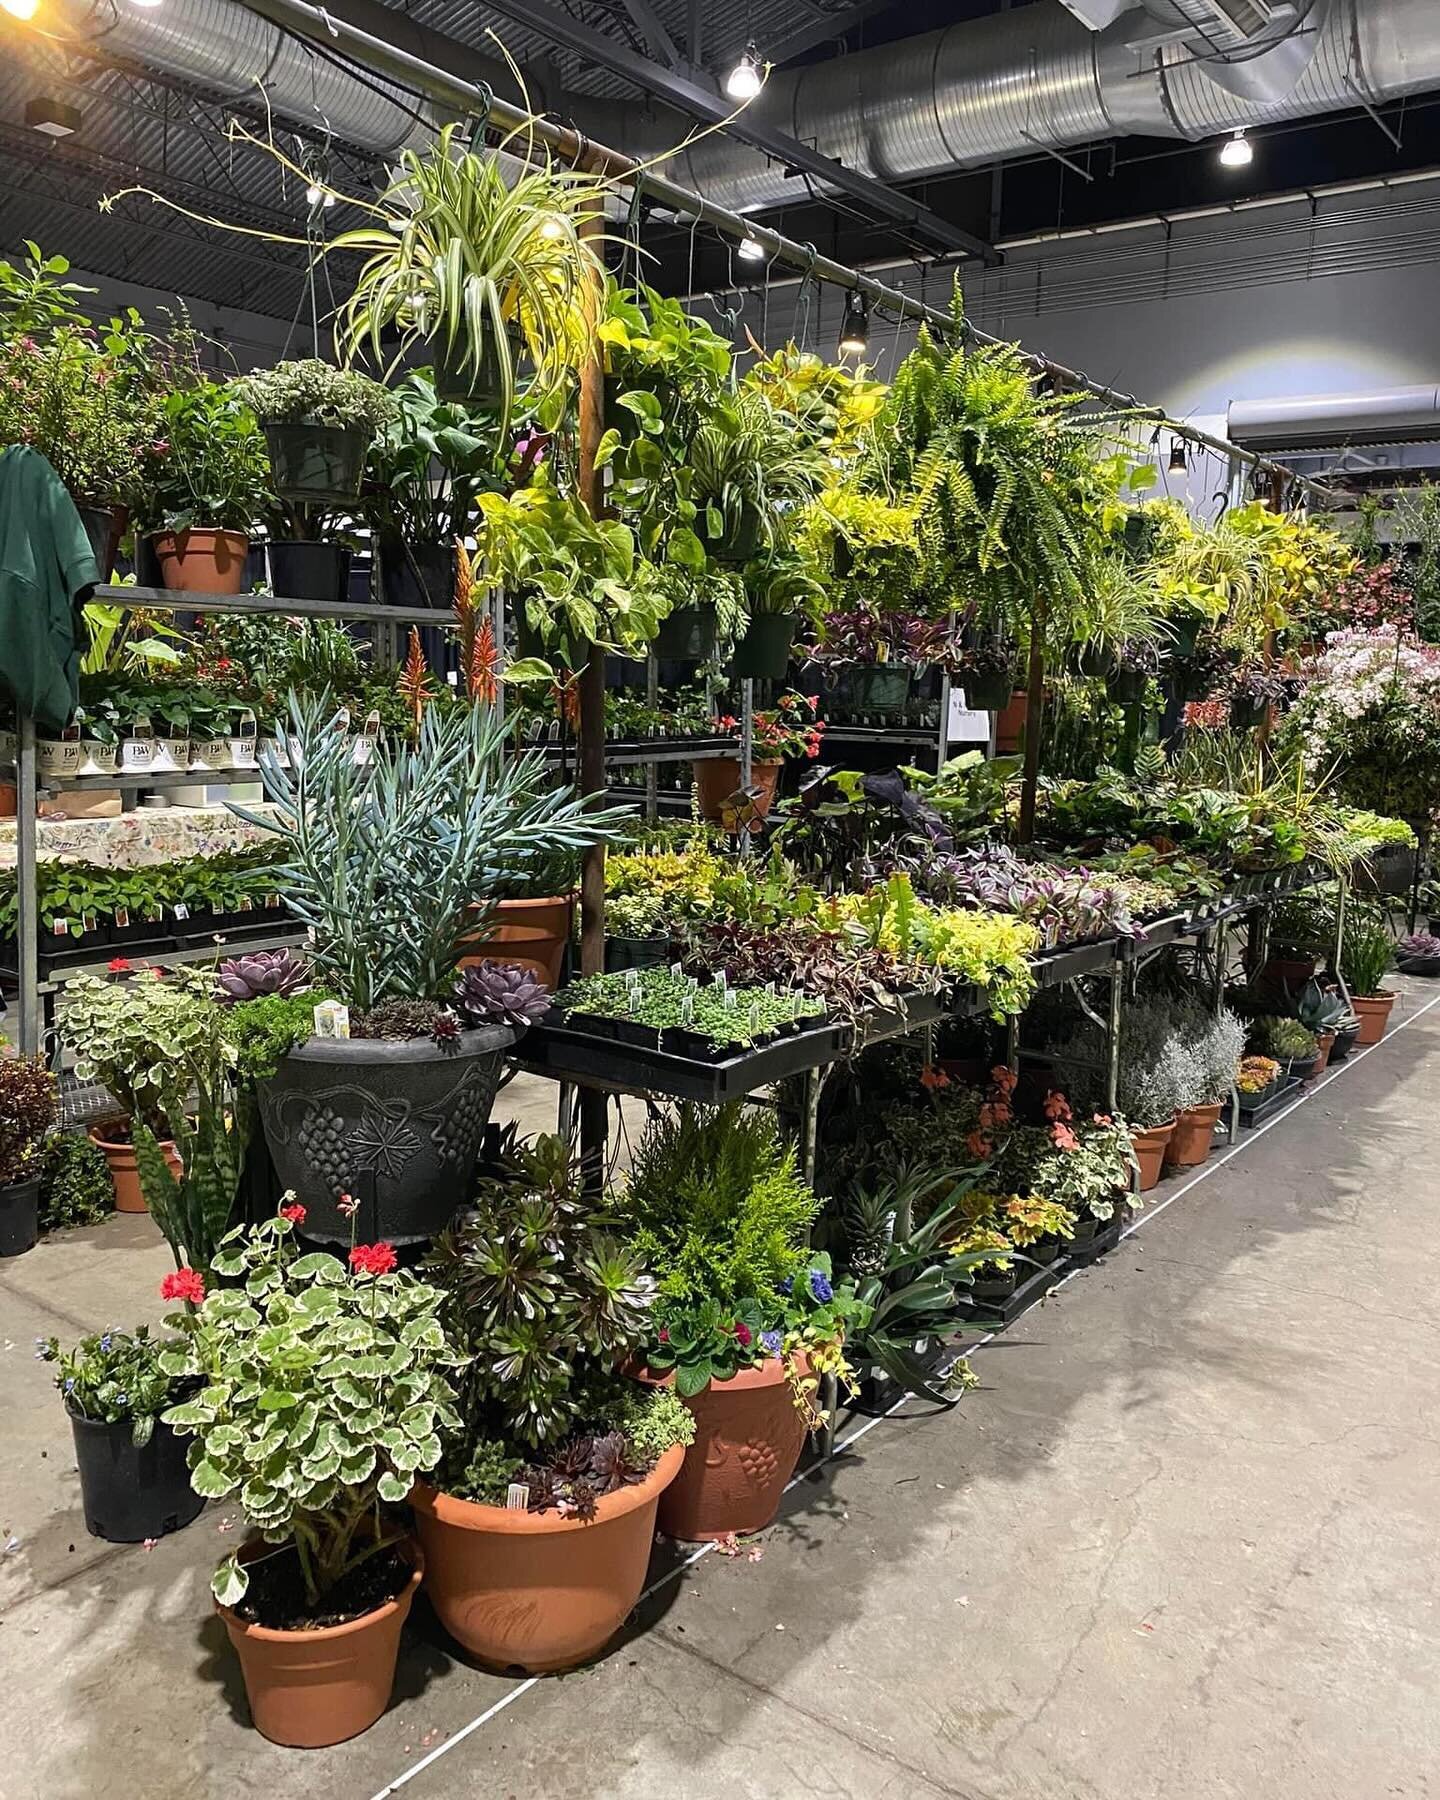 All set up for the Home &amp; Garden Show Feb.22-25 at the Portland Expo Center🪴🍃🌱